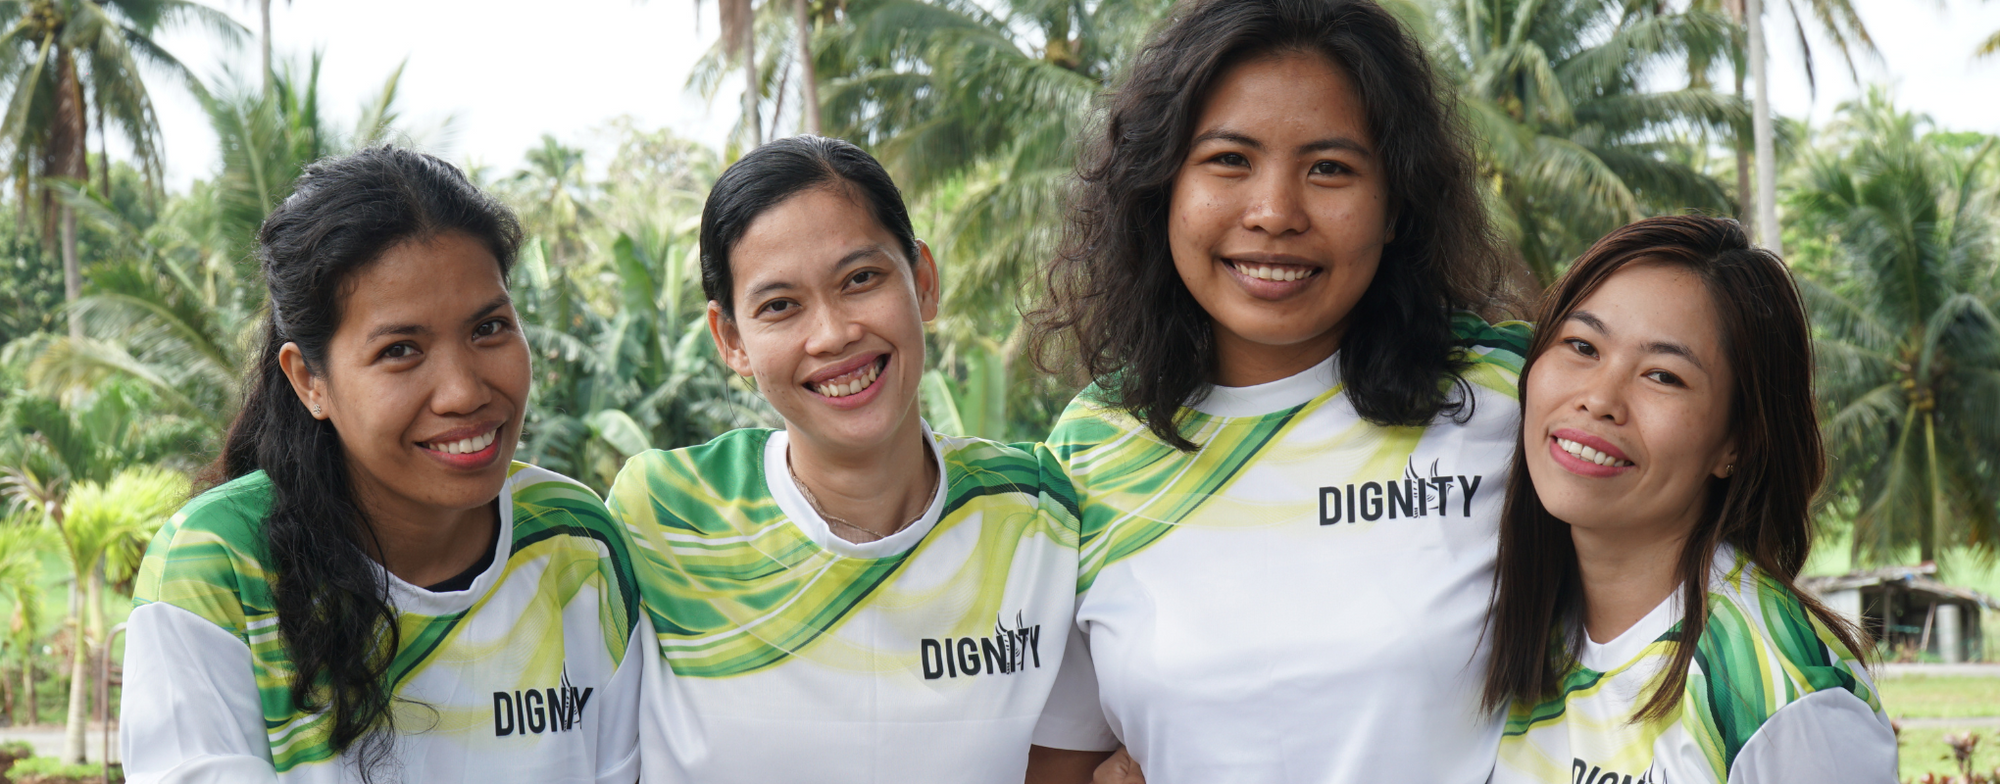 Dignity Coconuts Shines on National Coconut Day: Empowering Communities, Eradicating Exploitation